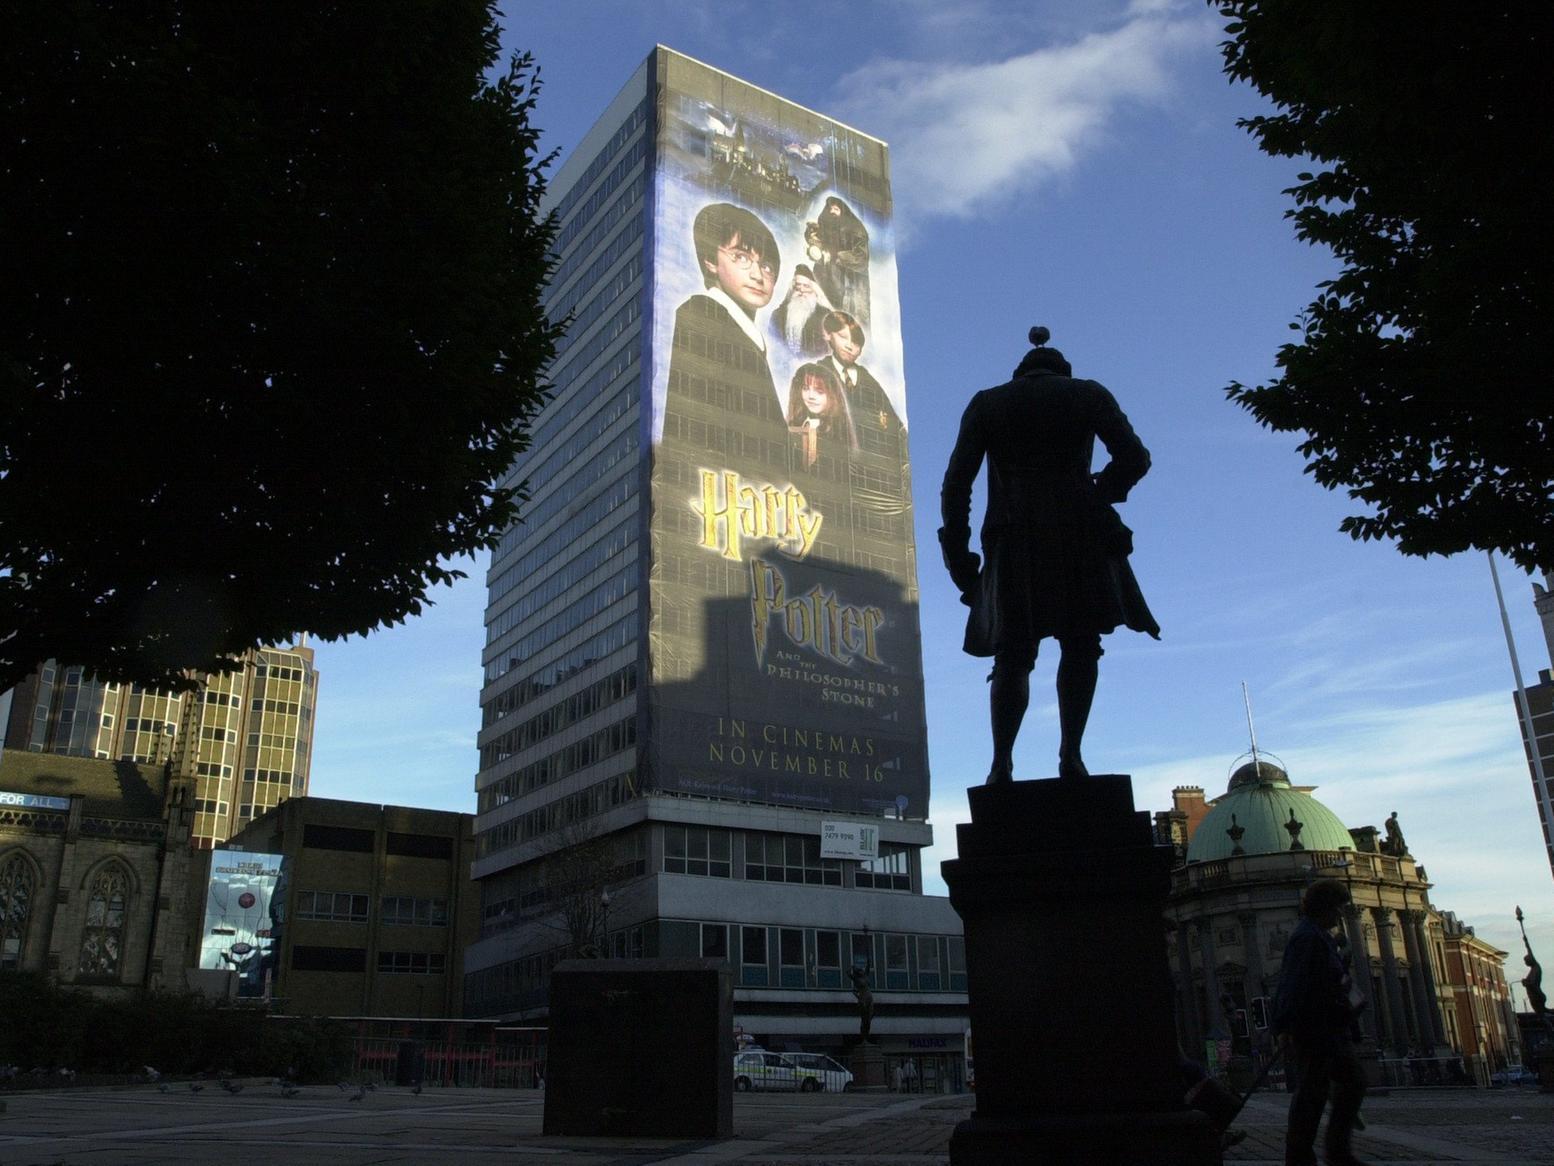 Royal Exchange House in City Square was advertising the upcoming release of the first Harry Potter film.